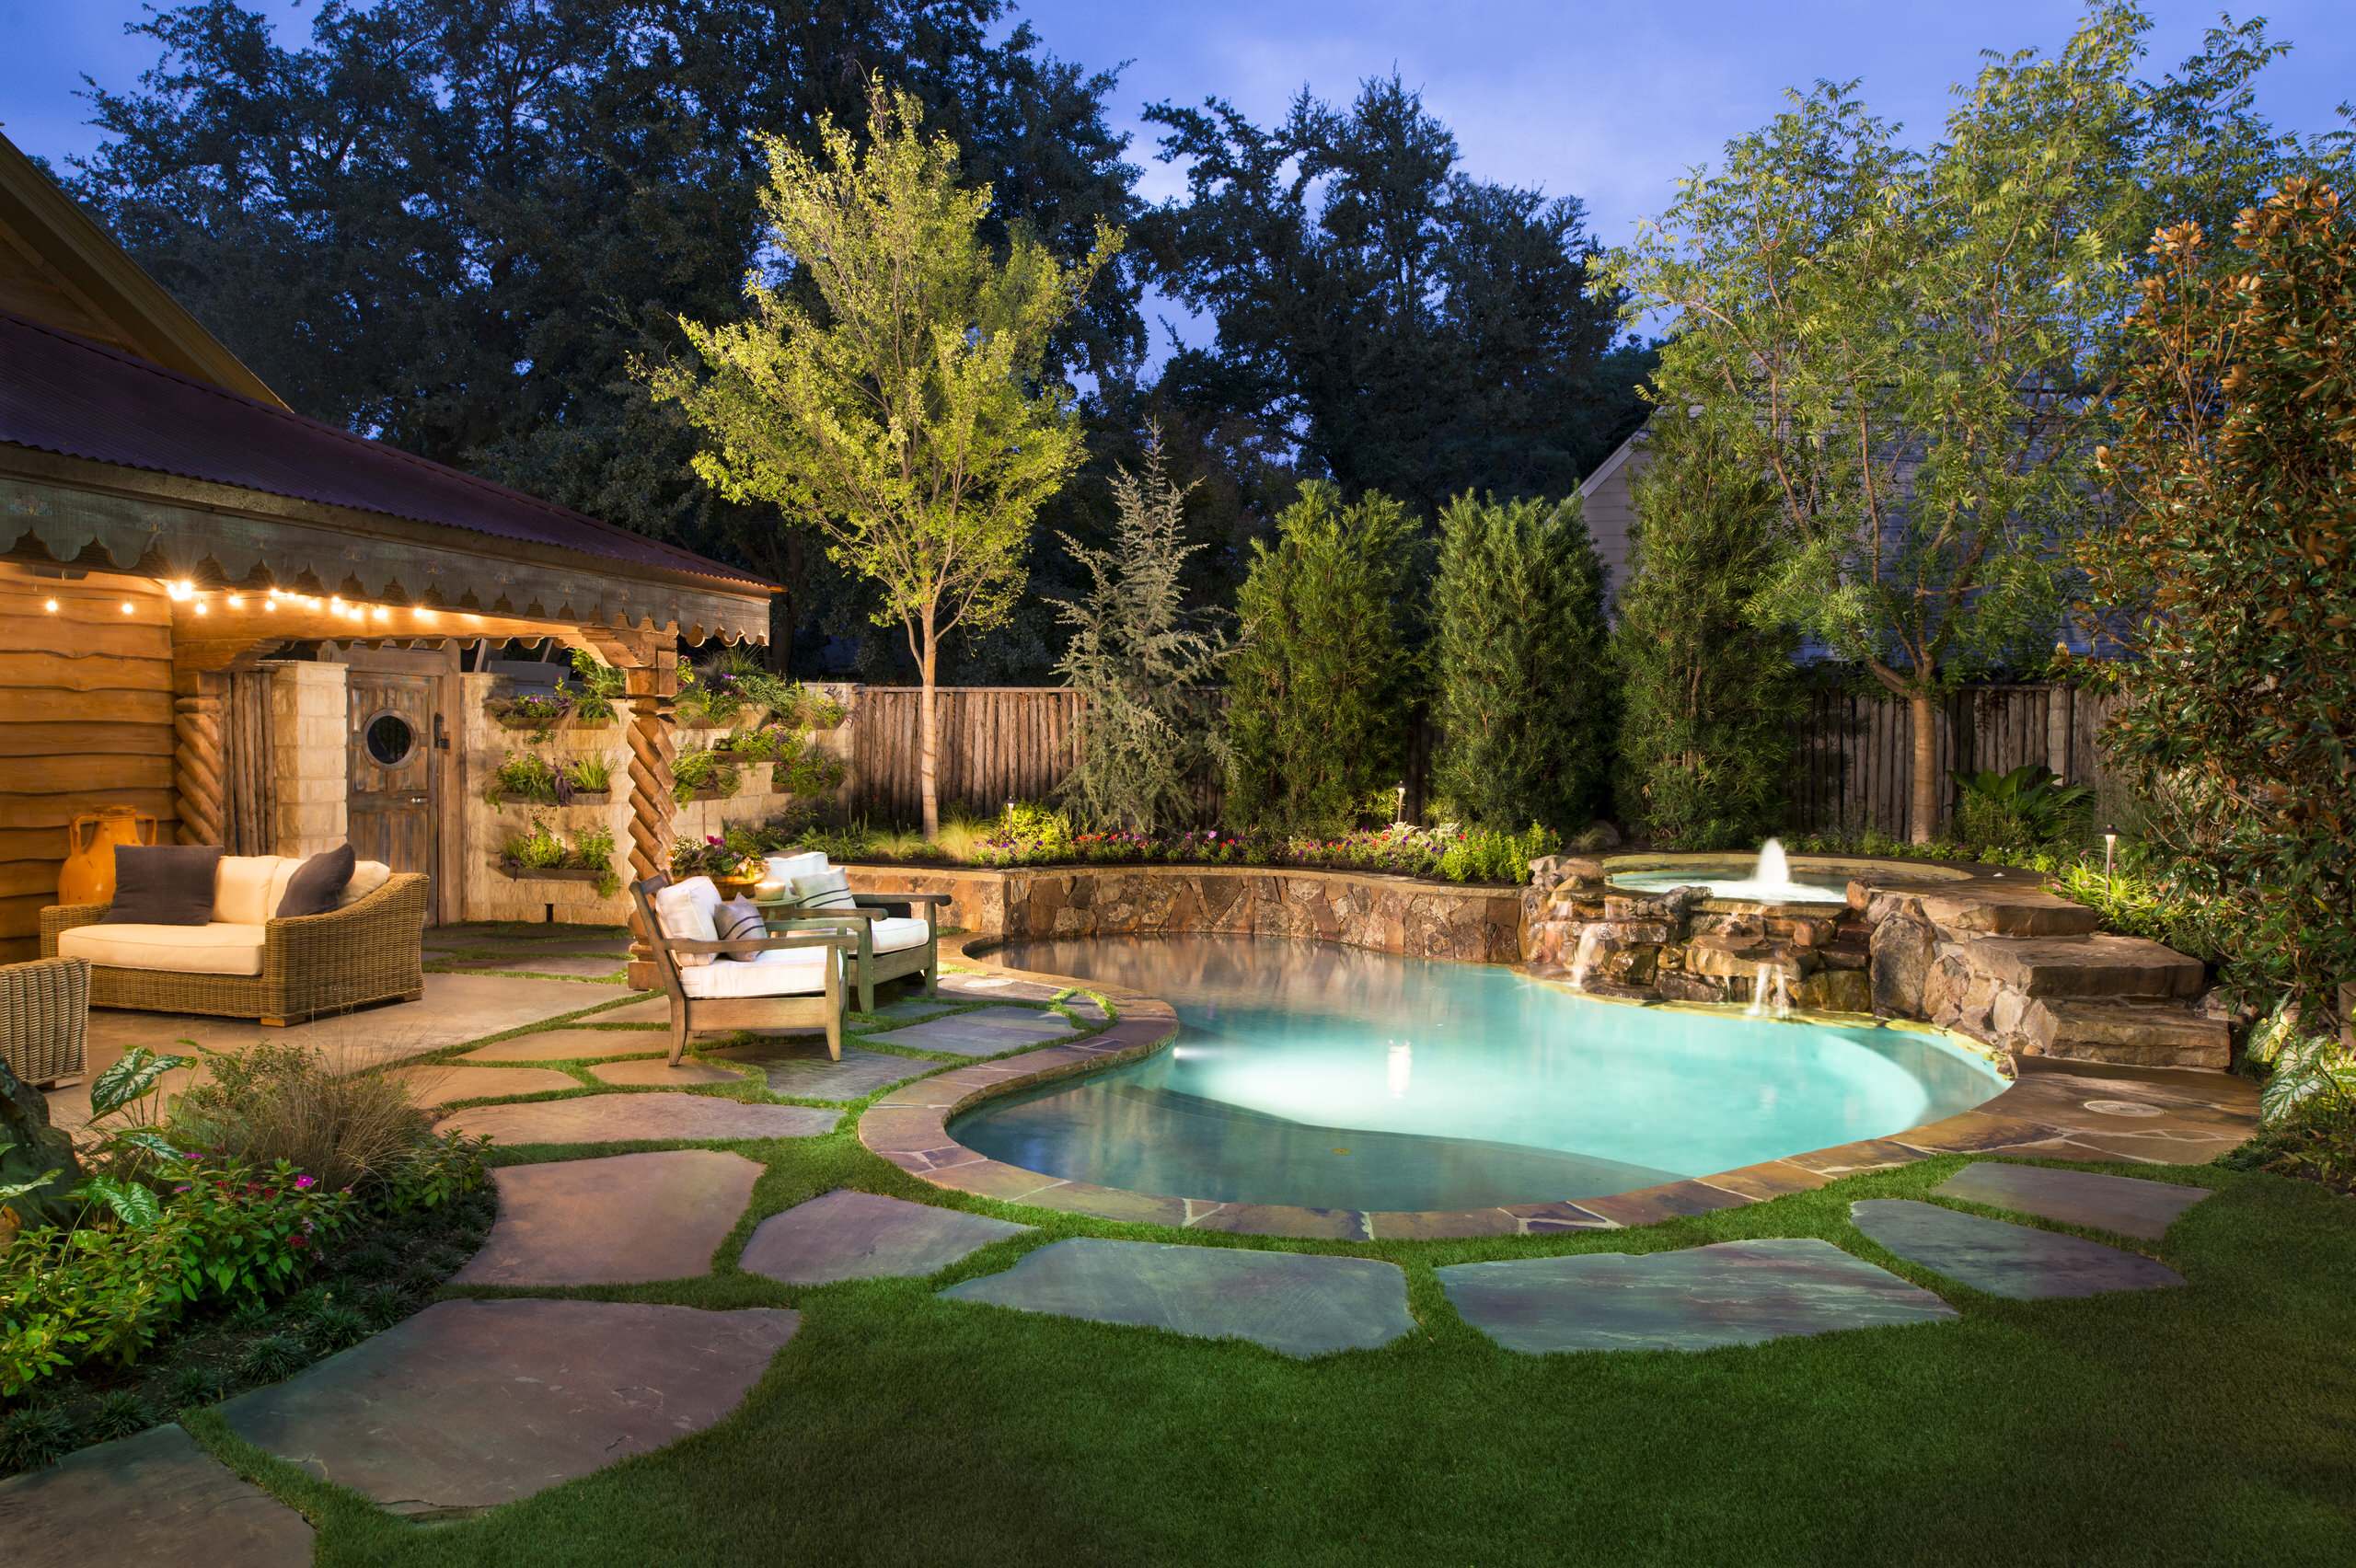 How Much Does It Cost To Build A Pool In Your Backyard